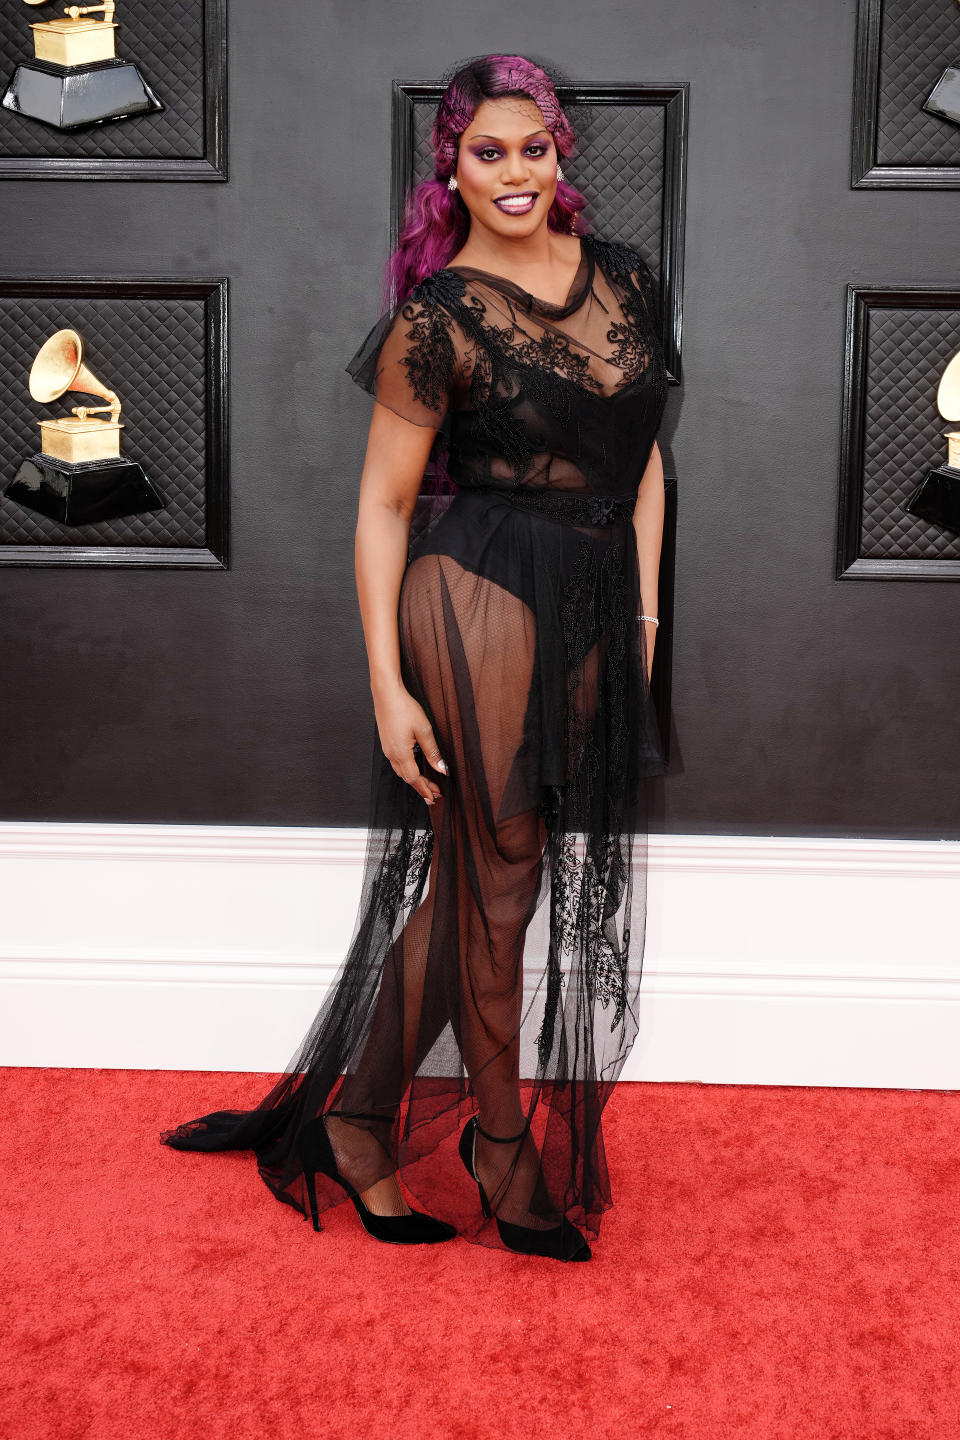 Laverne Cox at the 2022 Grammy Awards (Image via Getty Images)